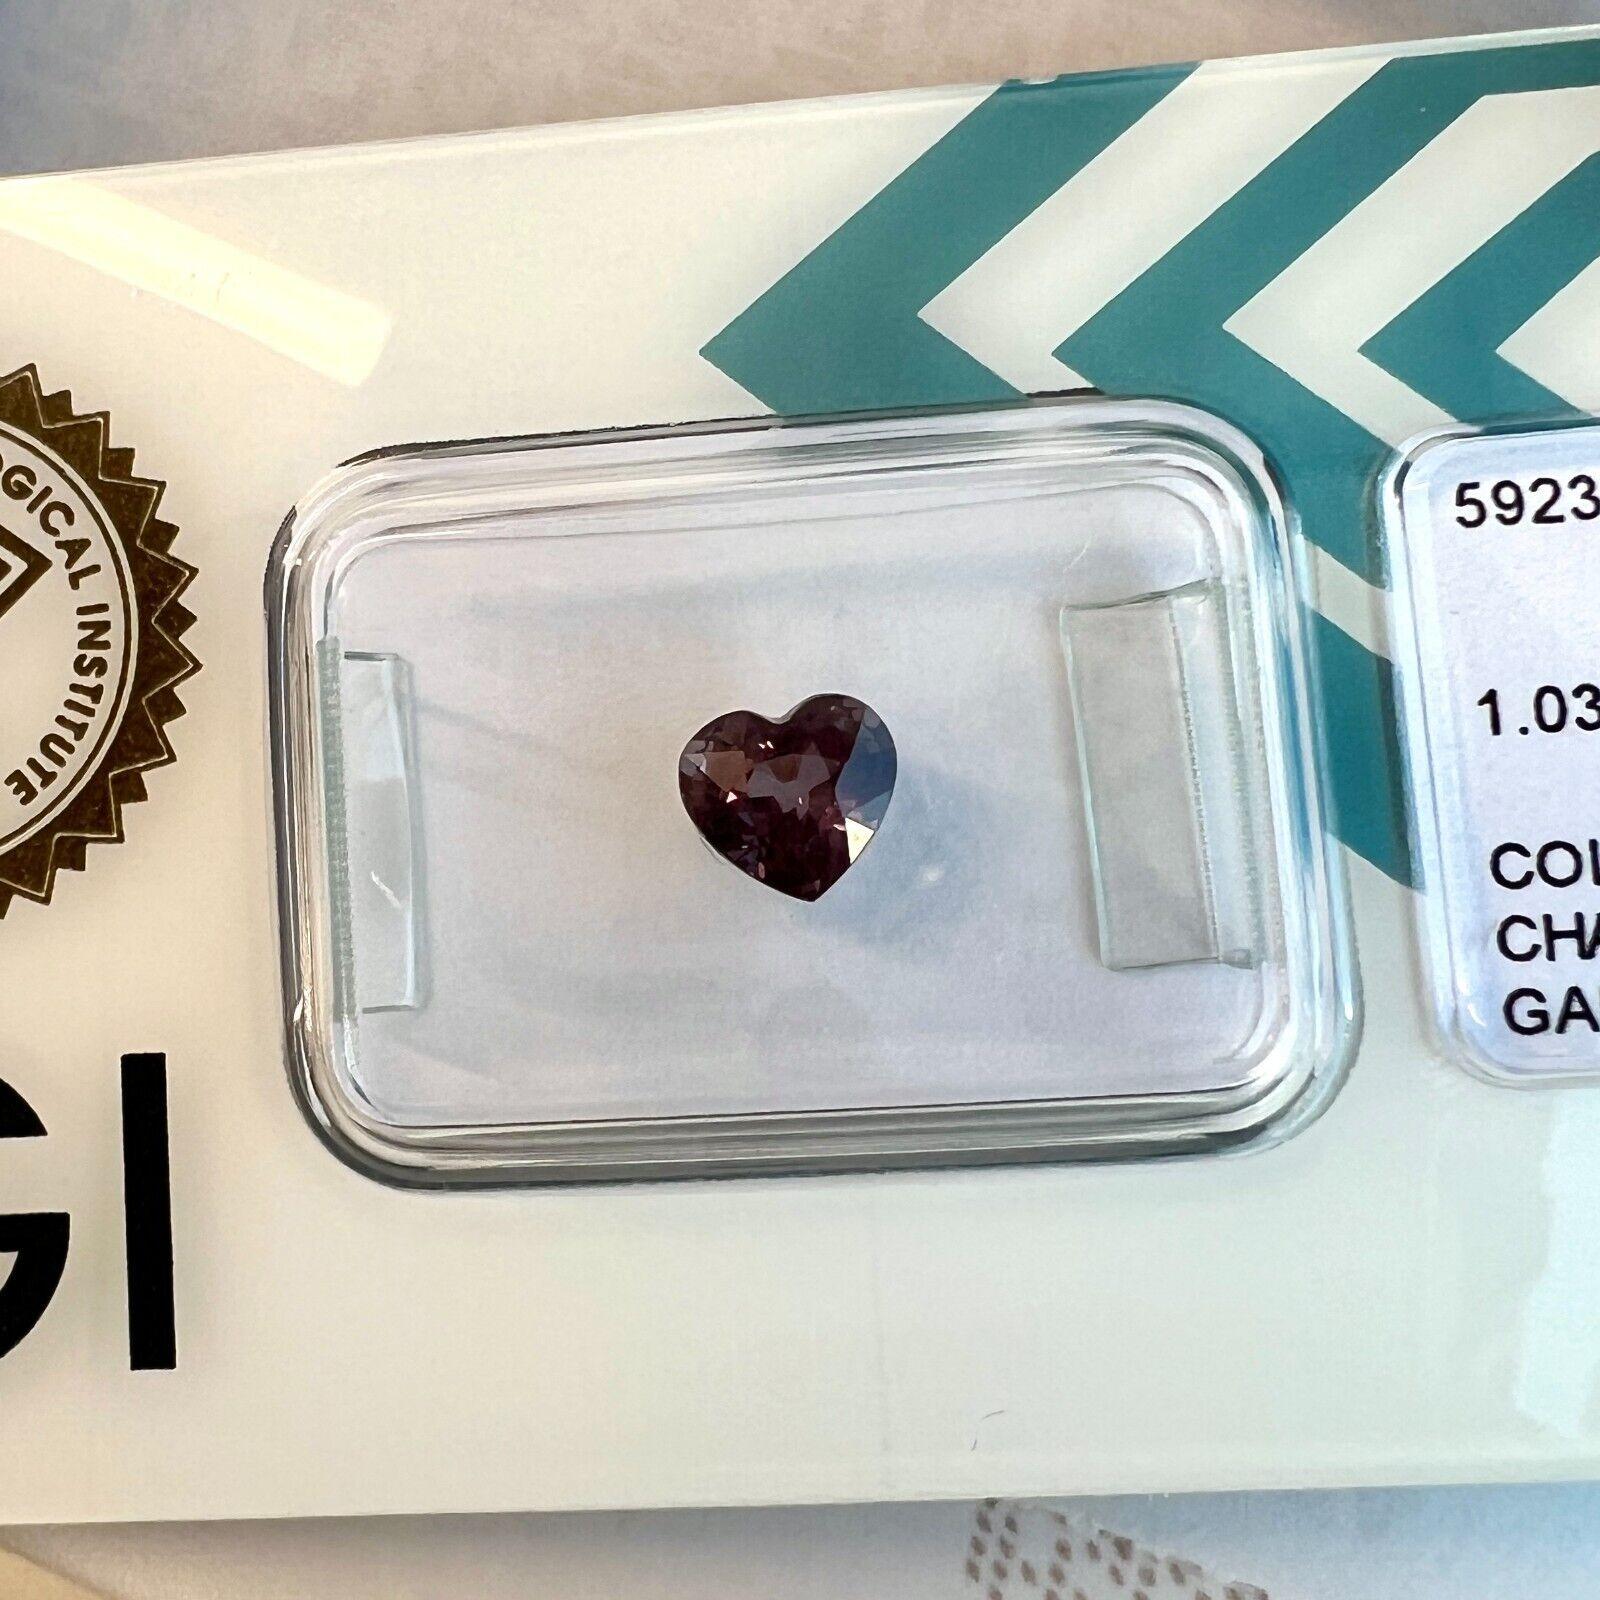 1.03Ct Natural Colour Change Garnet Pink Purple IGI Certified Heart Cut Gem

Unique Rare Untreated Colour Change Garnet Gemstone.
1.03 Carat untreated garnet with a rare colour change effect. Changing colour depending on the light its viewed in.